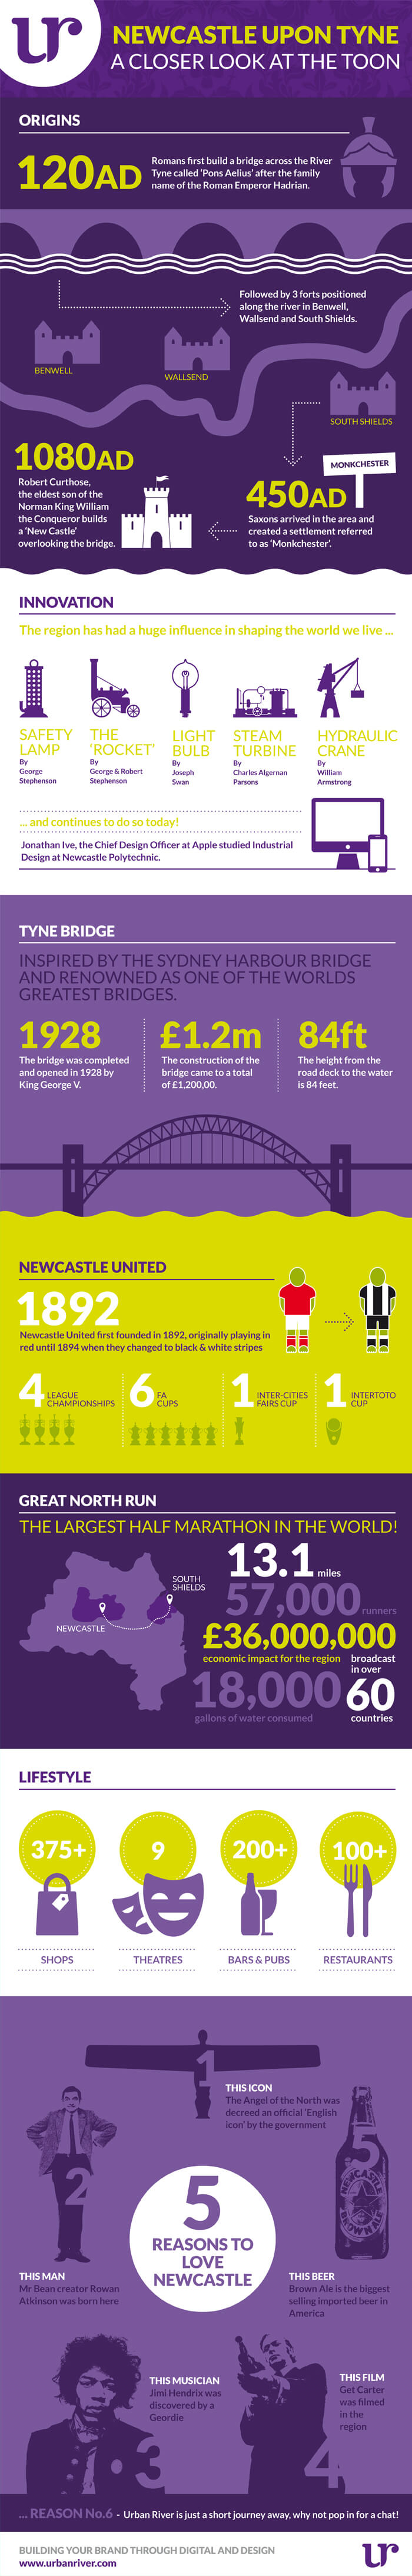 Newcastle Upon Tyne - A Closer Look at the Toon